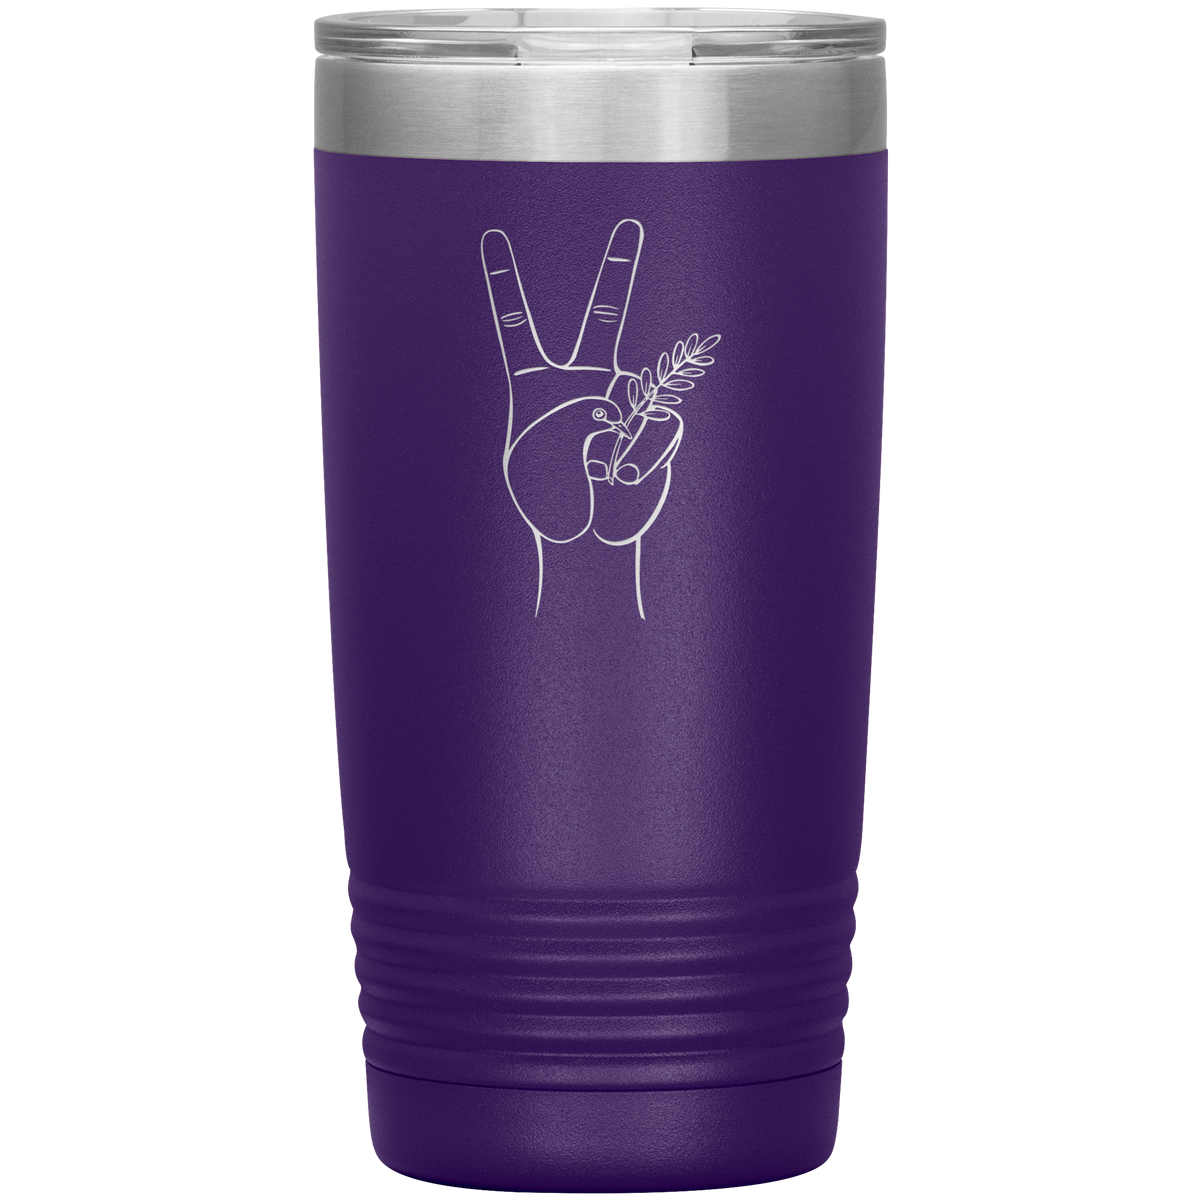 Dove hand peace symbol 20 oz stainless steel Vacuum insulated hot and cold beverage Tumbler